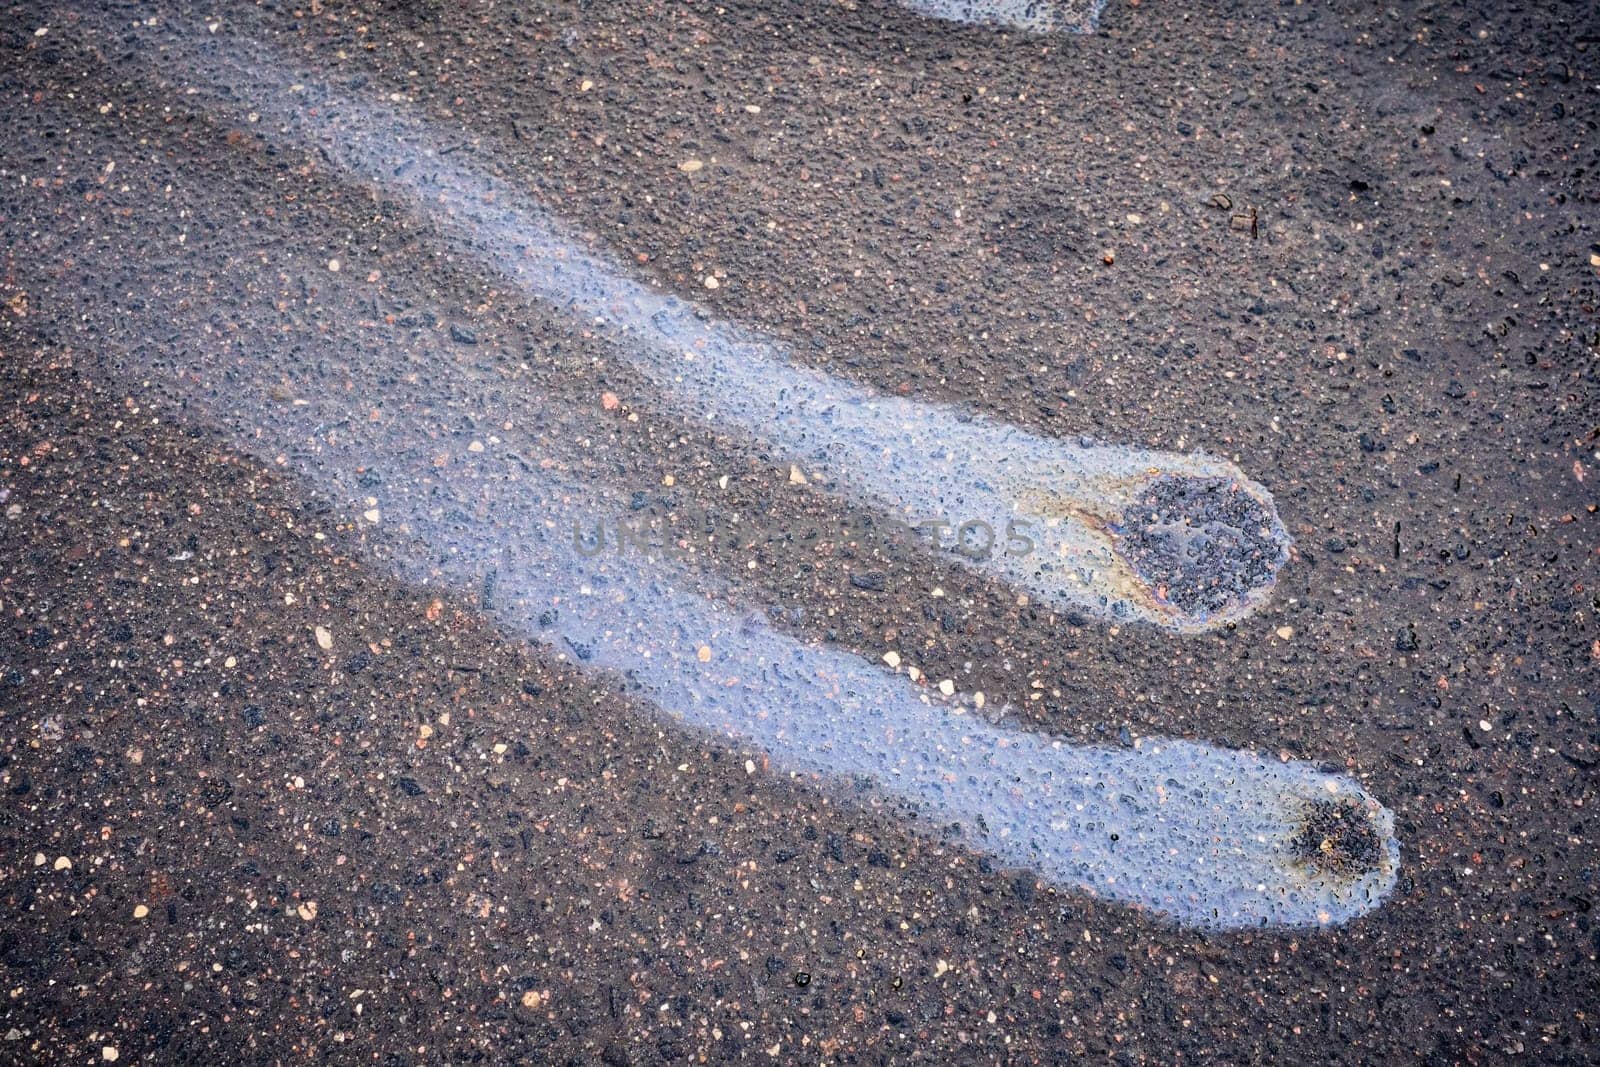 Rain blurred car oil from a malfunctioning car in a parking lot. Texture of asphalt and rainbow stains. Environmental pollution concept.